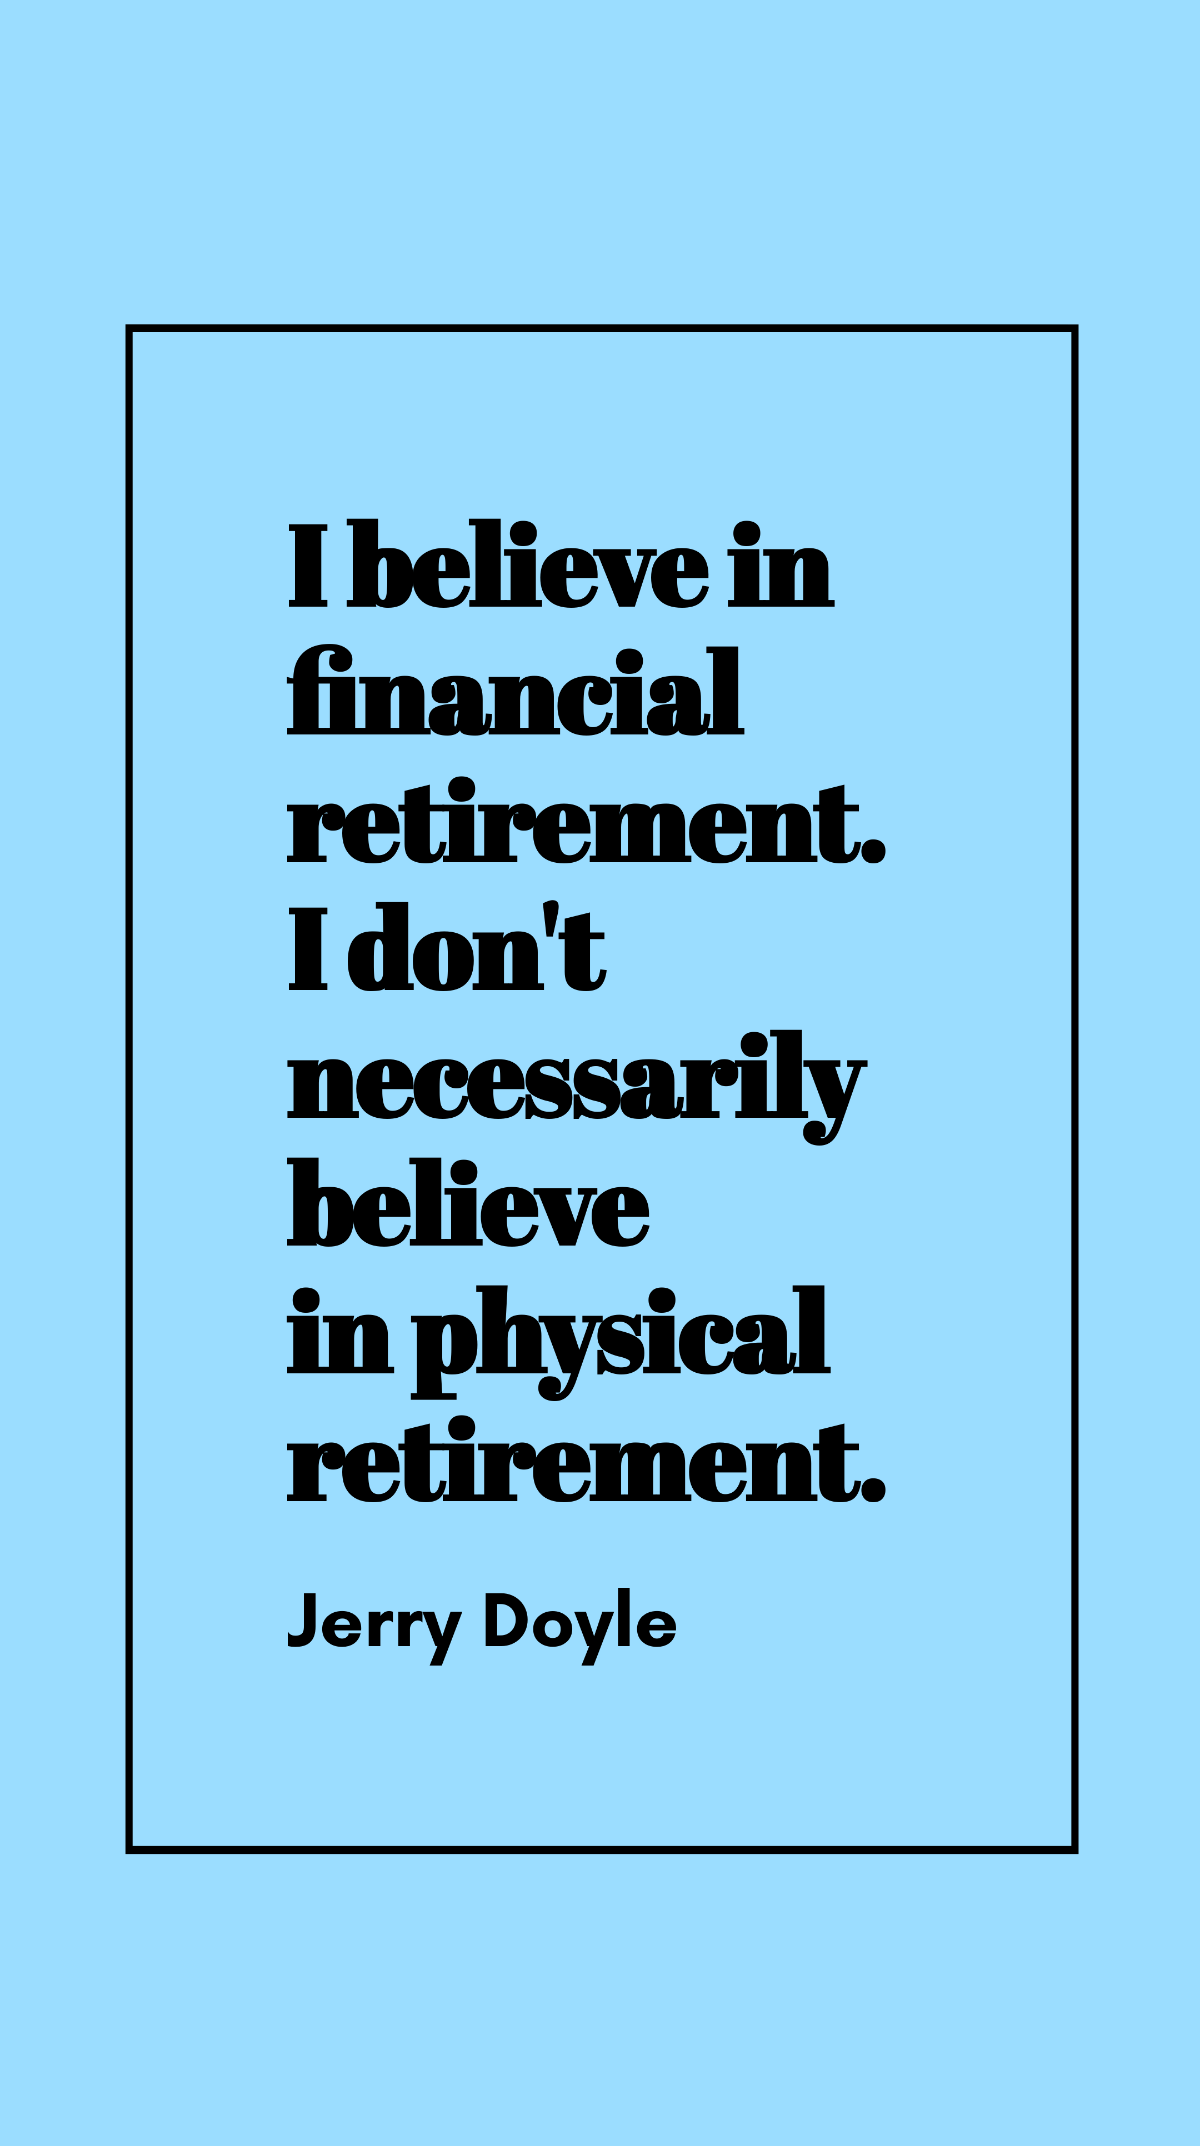 Free Jerry Doyle - I believe in financial retirement. I don't necessarily believe in physical retirement. Template